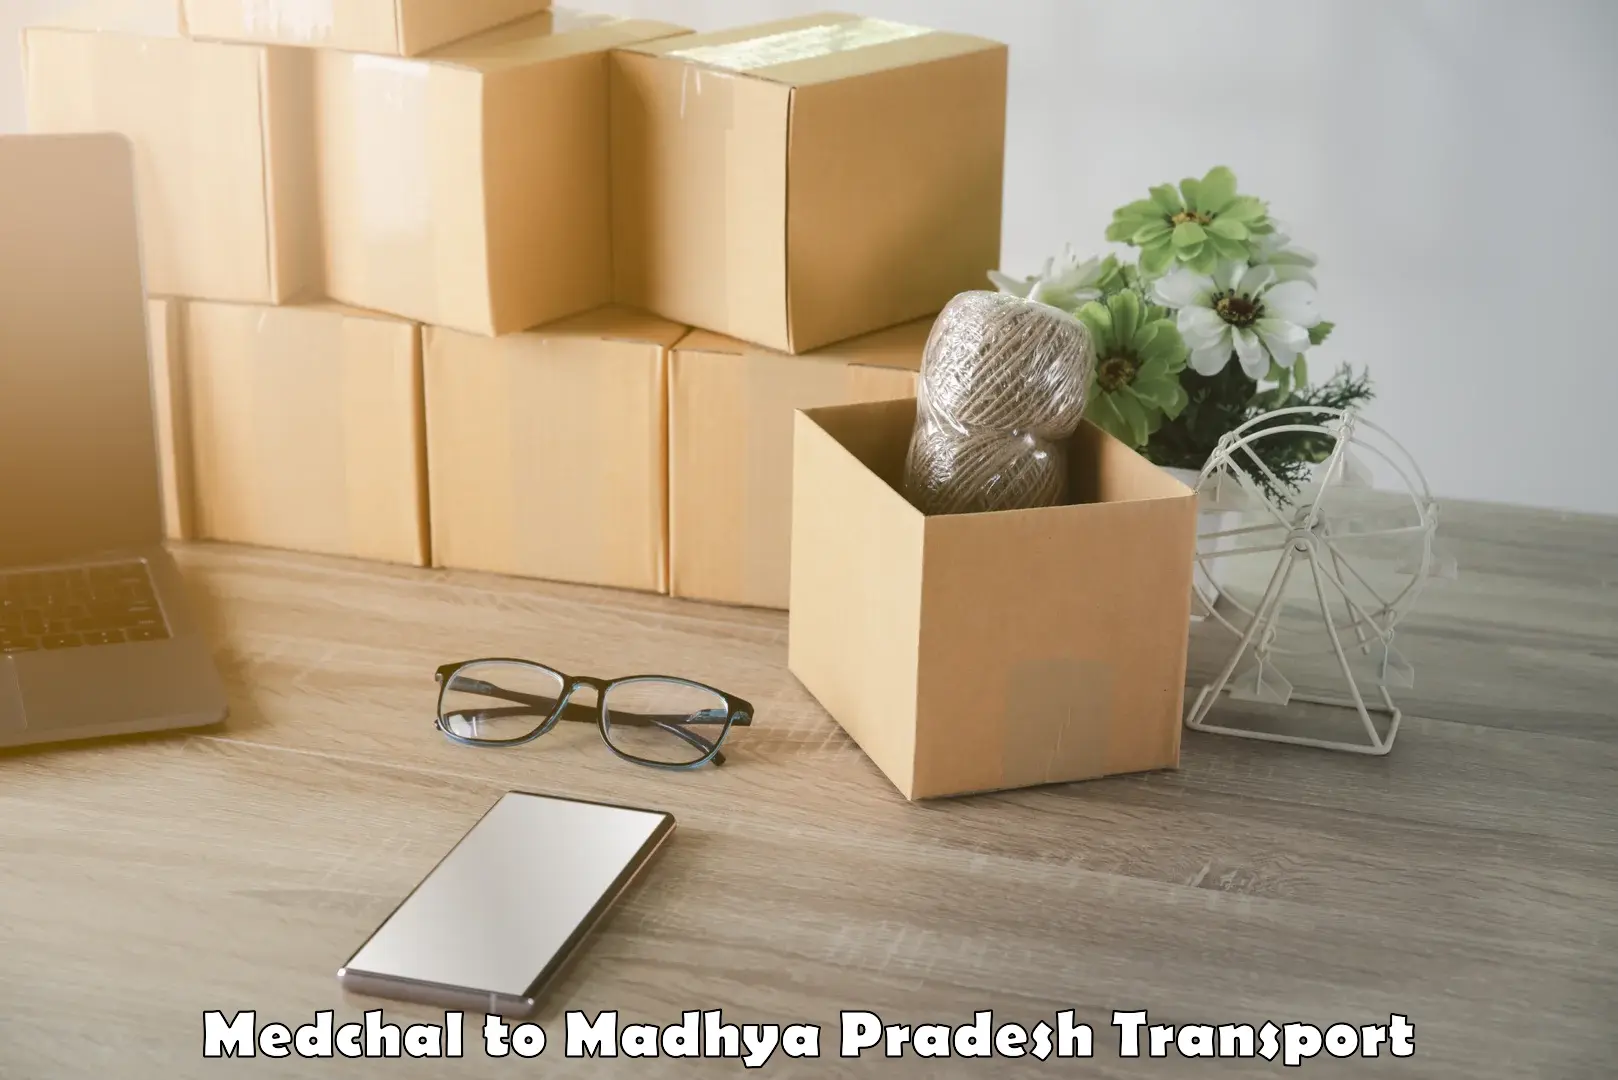 Delivery service Medchal to Shivpuri